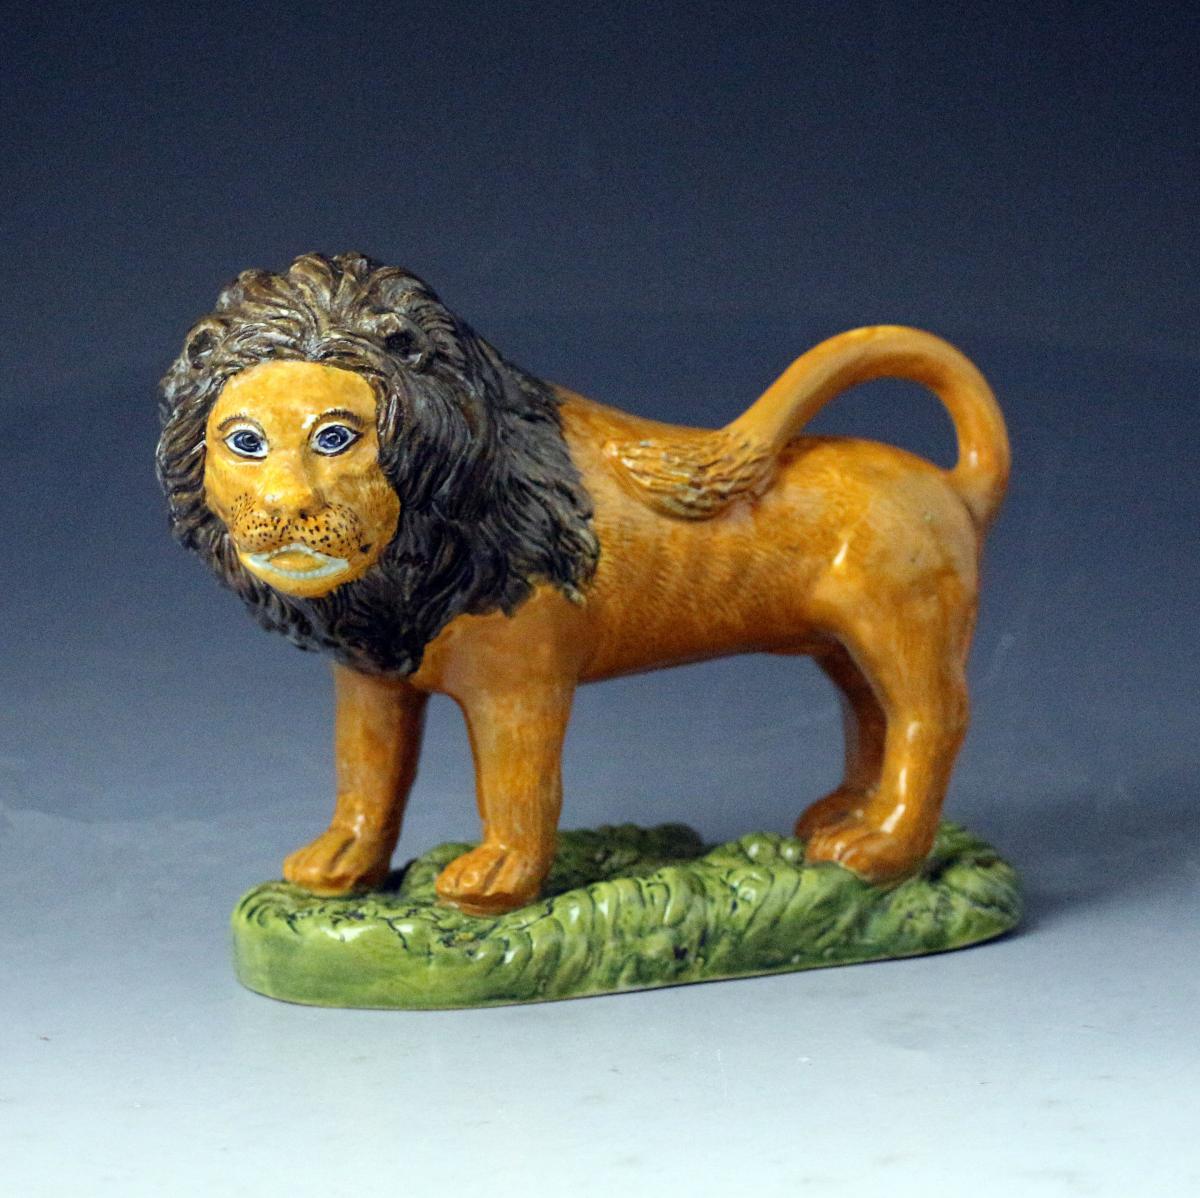 Prattware pottery figure of a standing Lion on a green grassy base, early 19th century